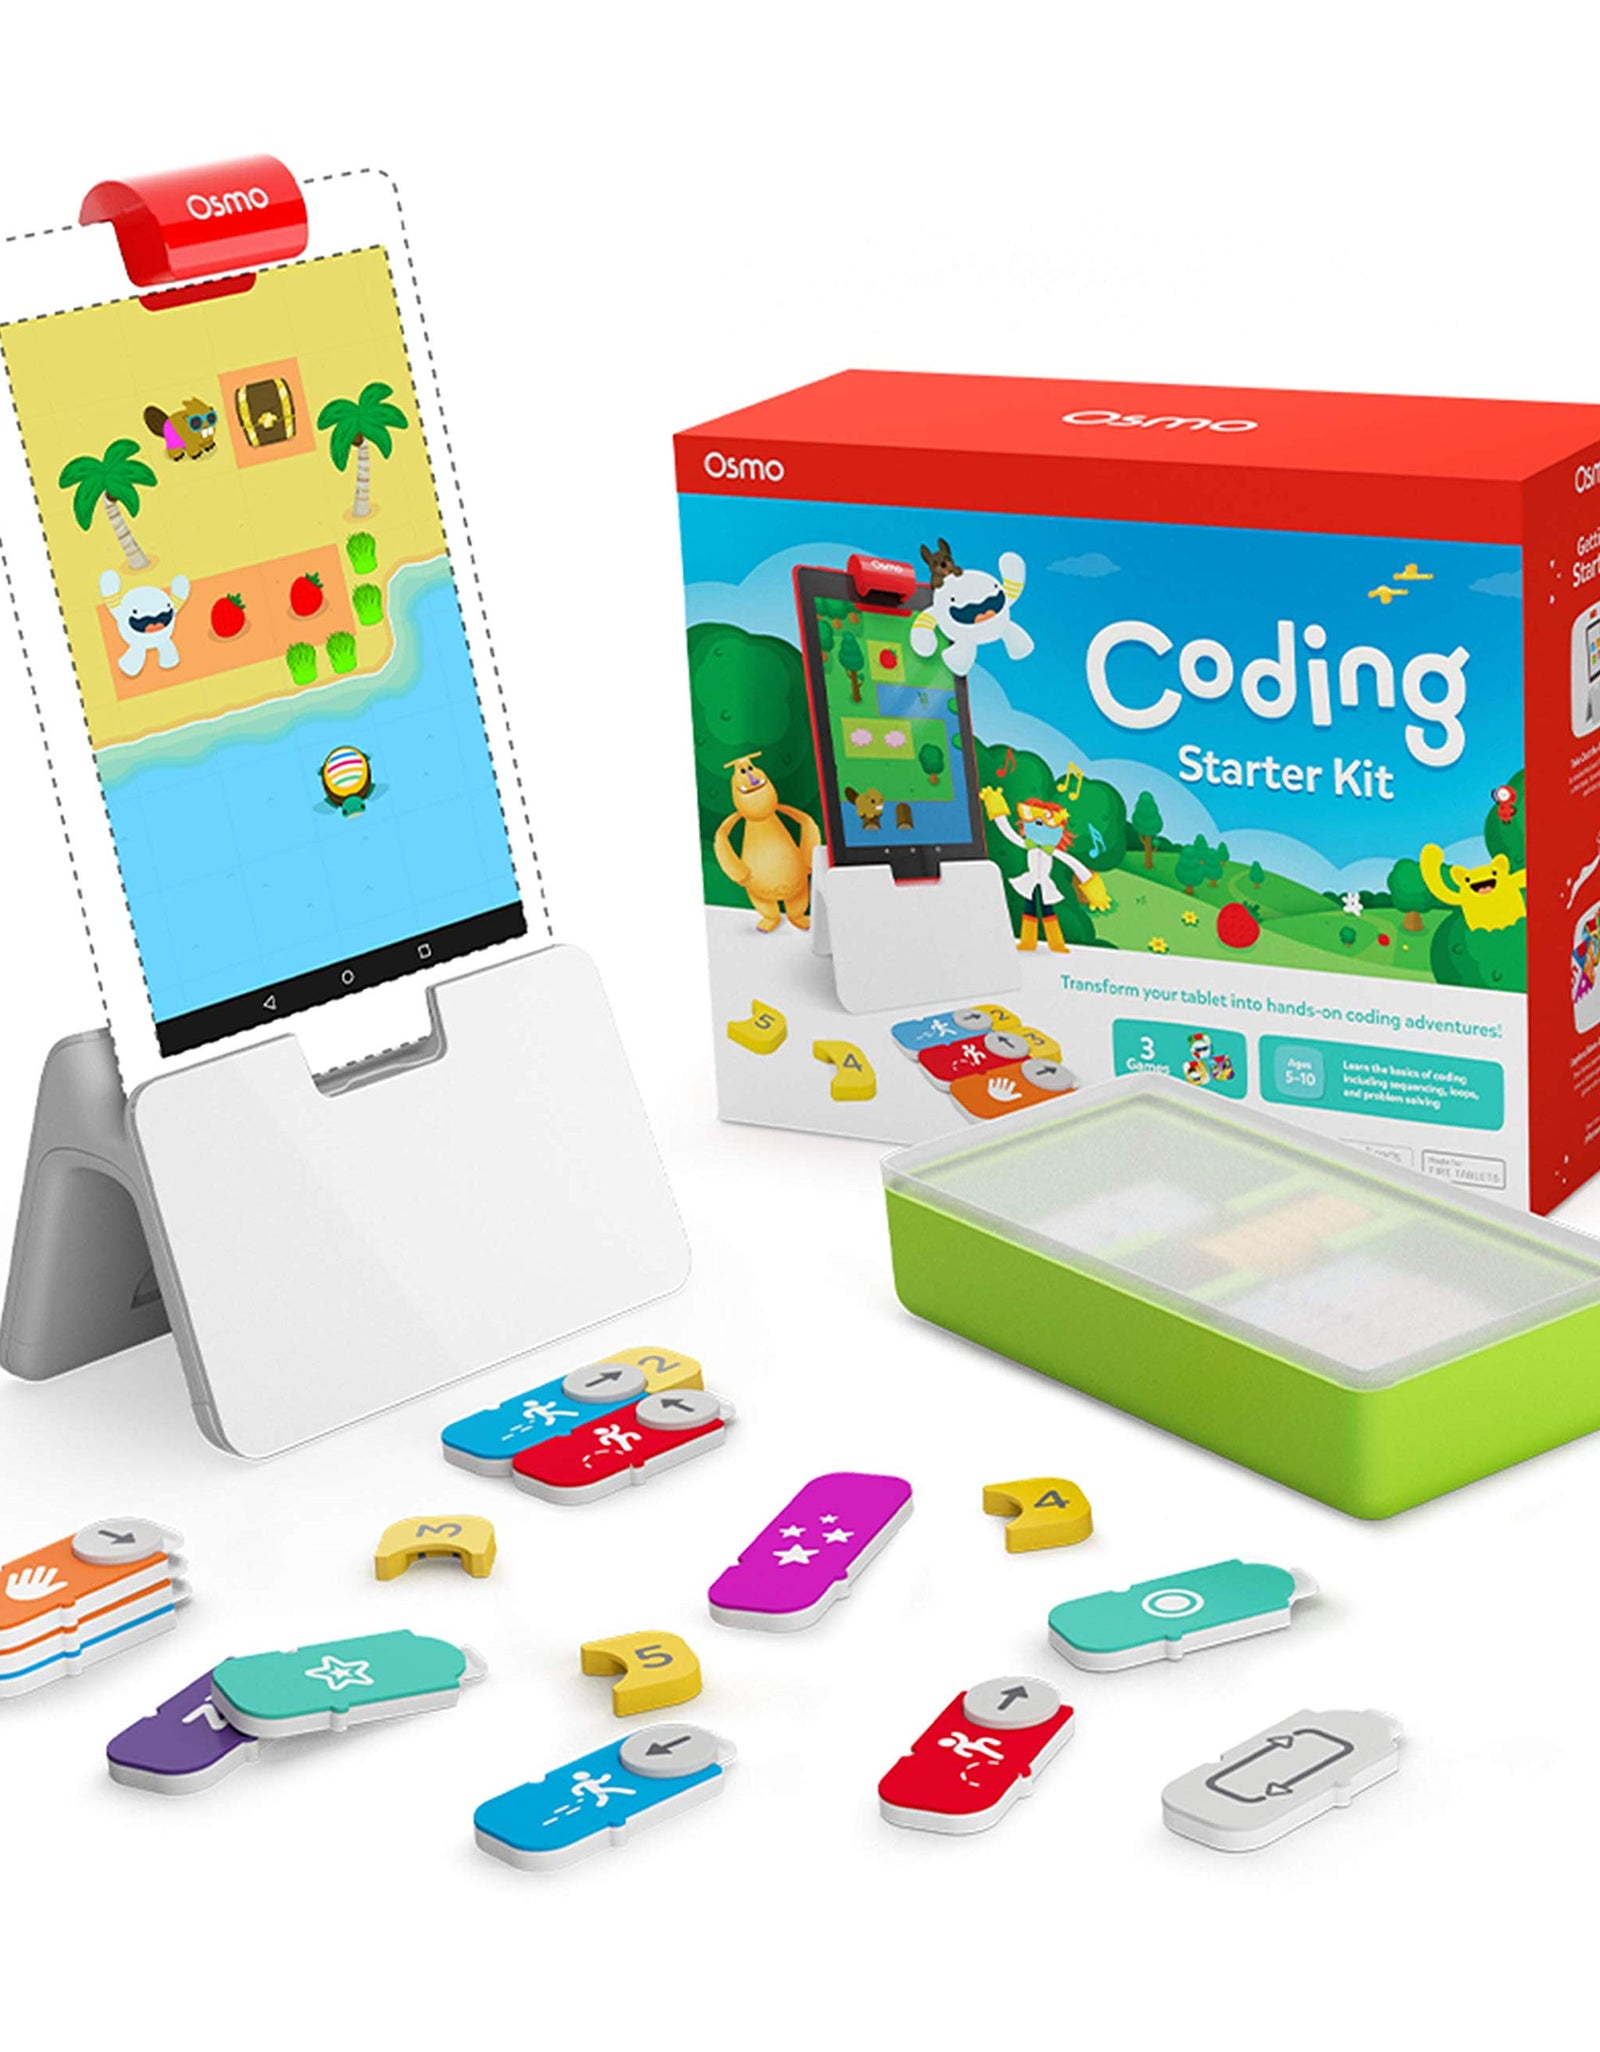 Osmo - Coding Starter Kit for iPad - 3 Educational Learning Games - Ages 5-10+ - Learn to Code, Coding Basics & Coding Puzzles - STEM Toy (Osmo iPad Base Included)